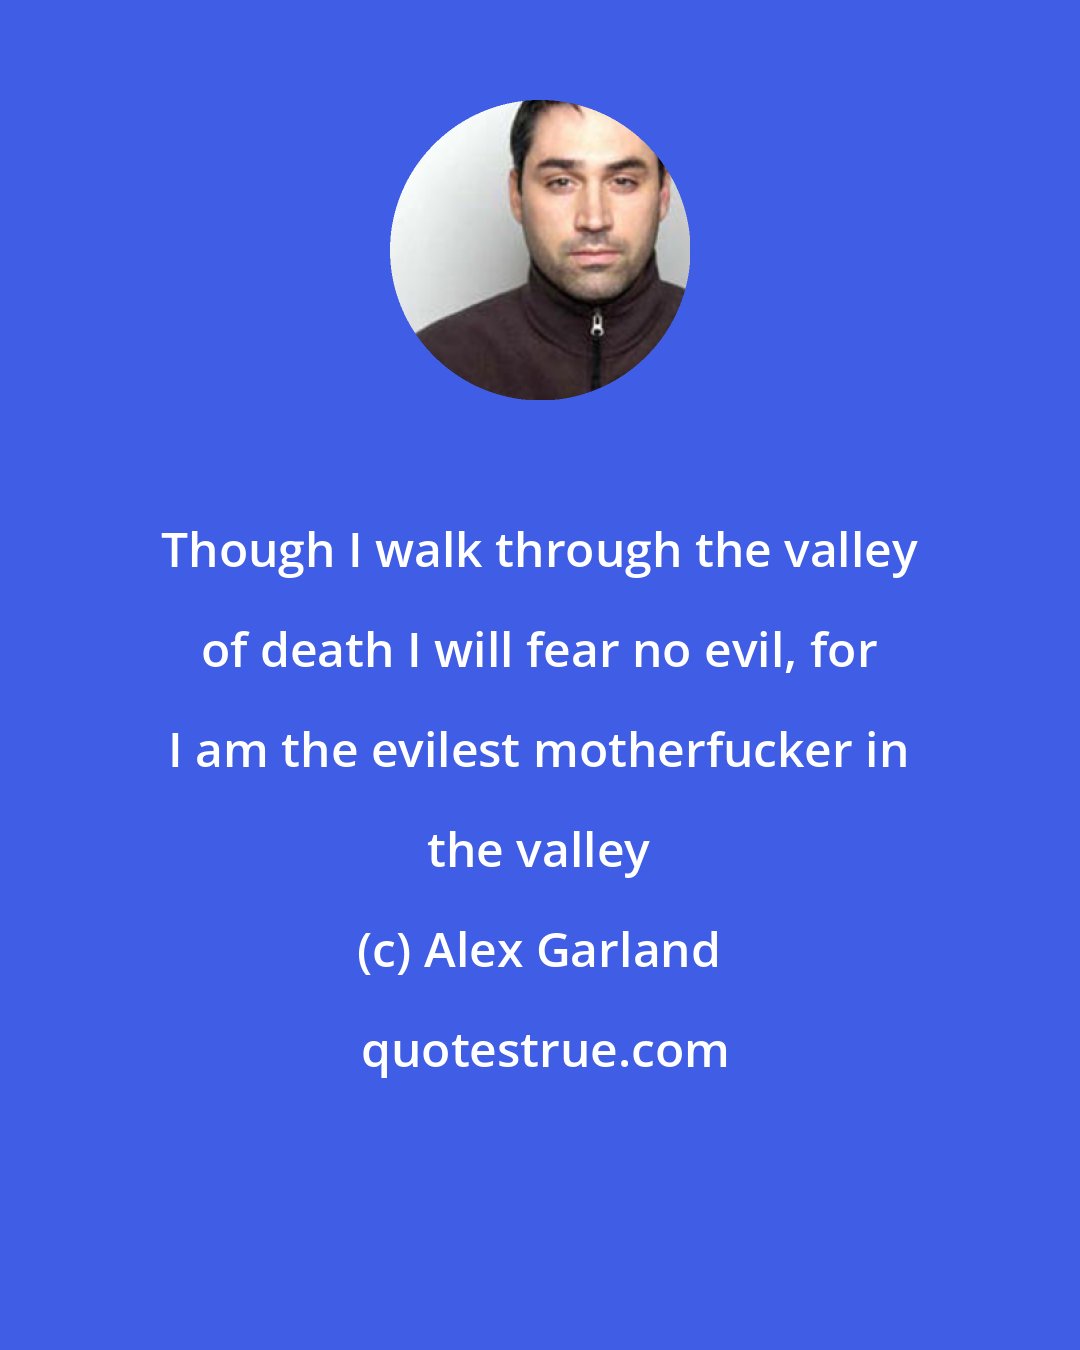 Alex Garland: Though I walk through the valley of death I will fear no evil, for I am the evilest motherfucker in the valley